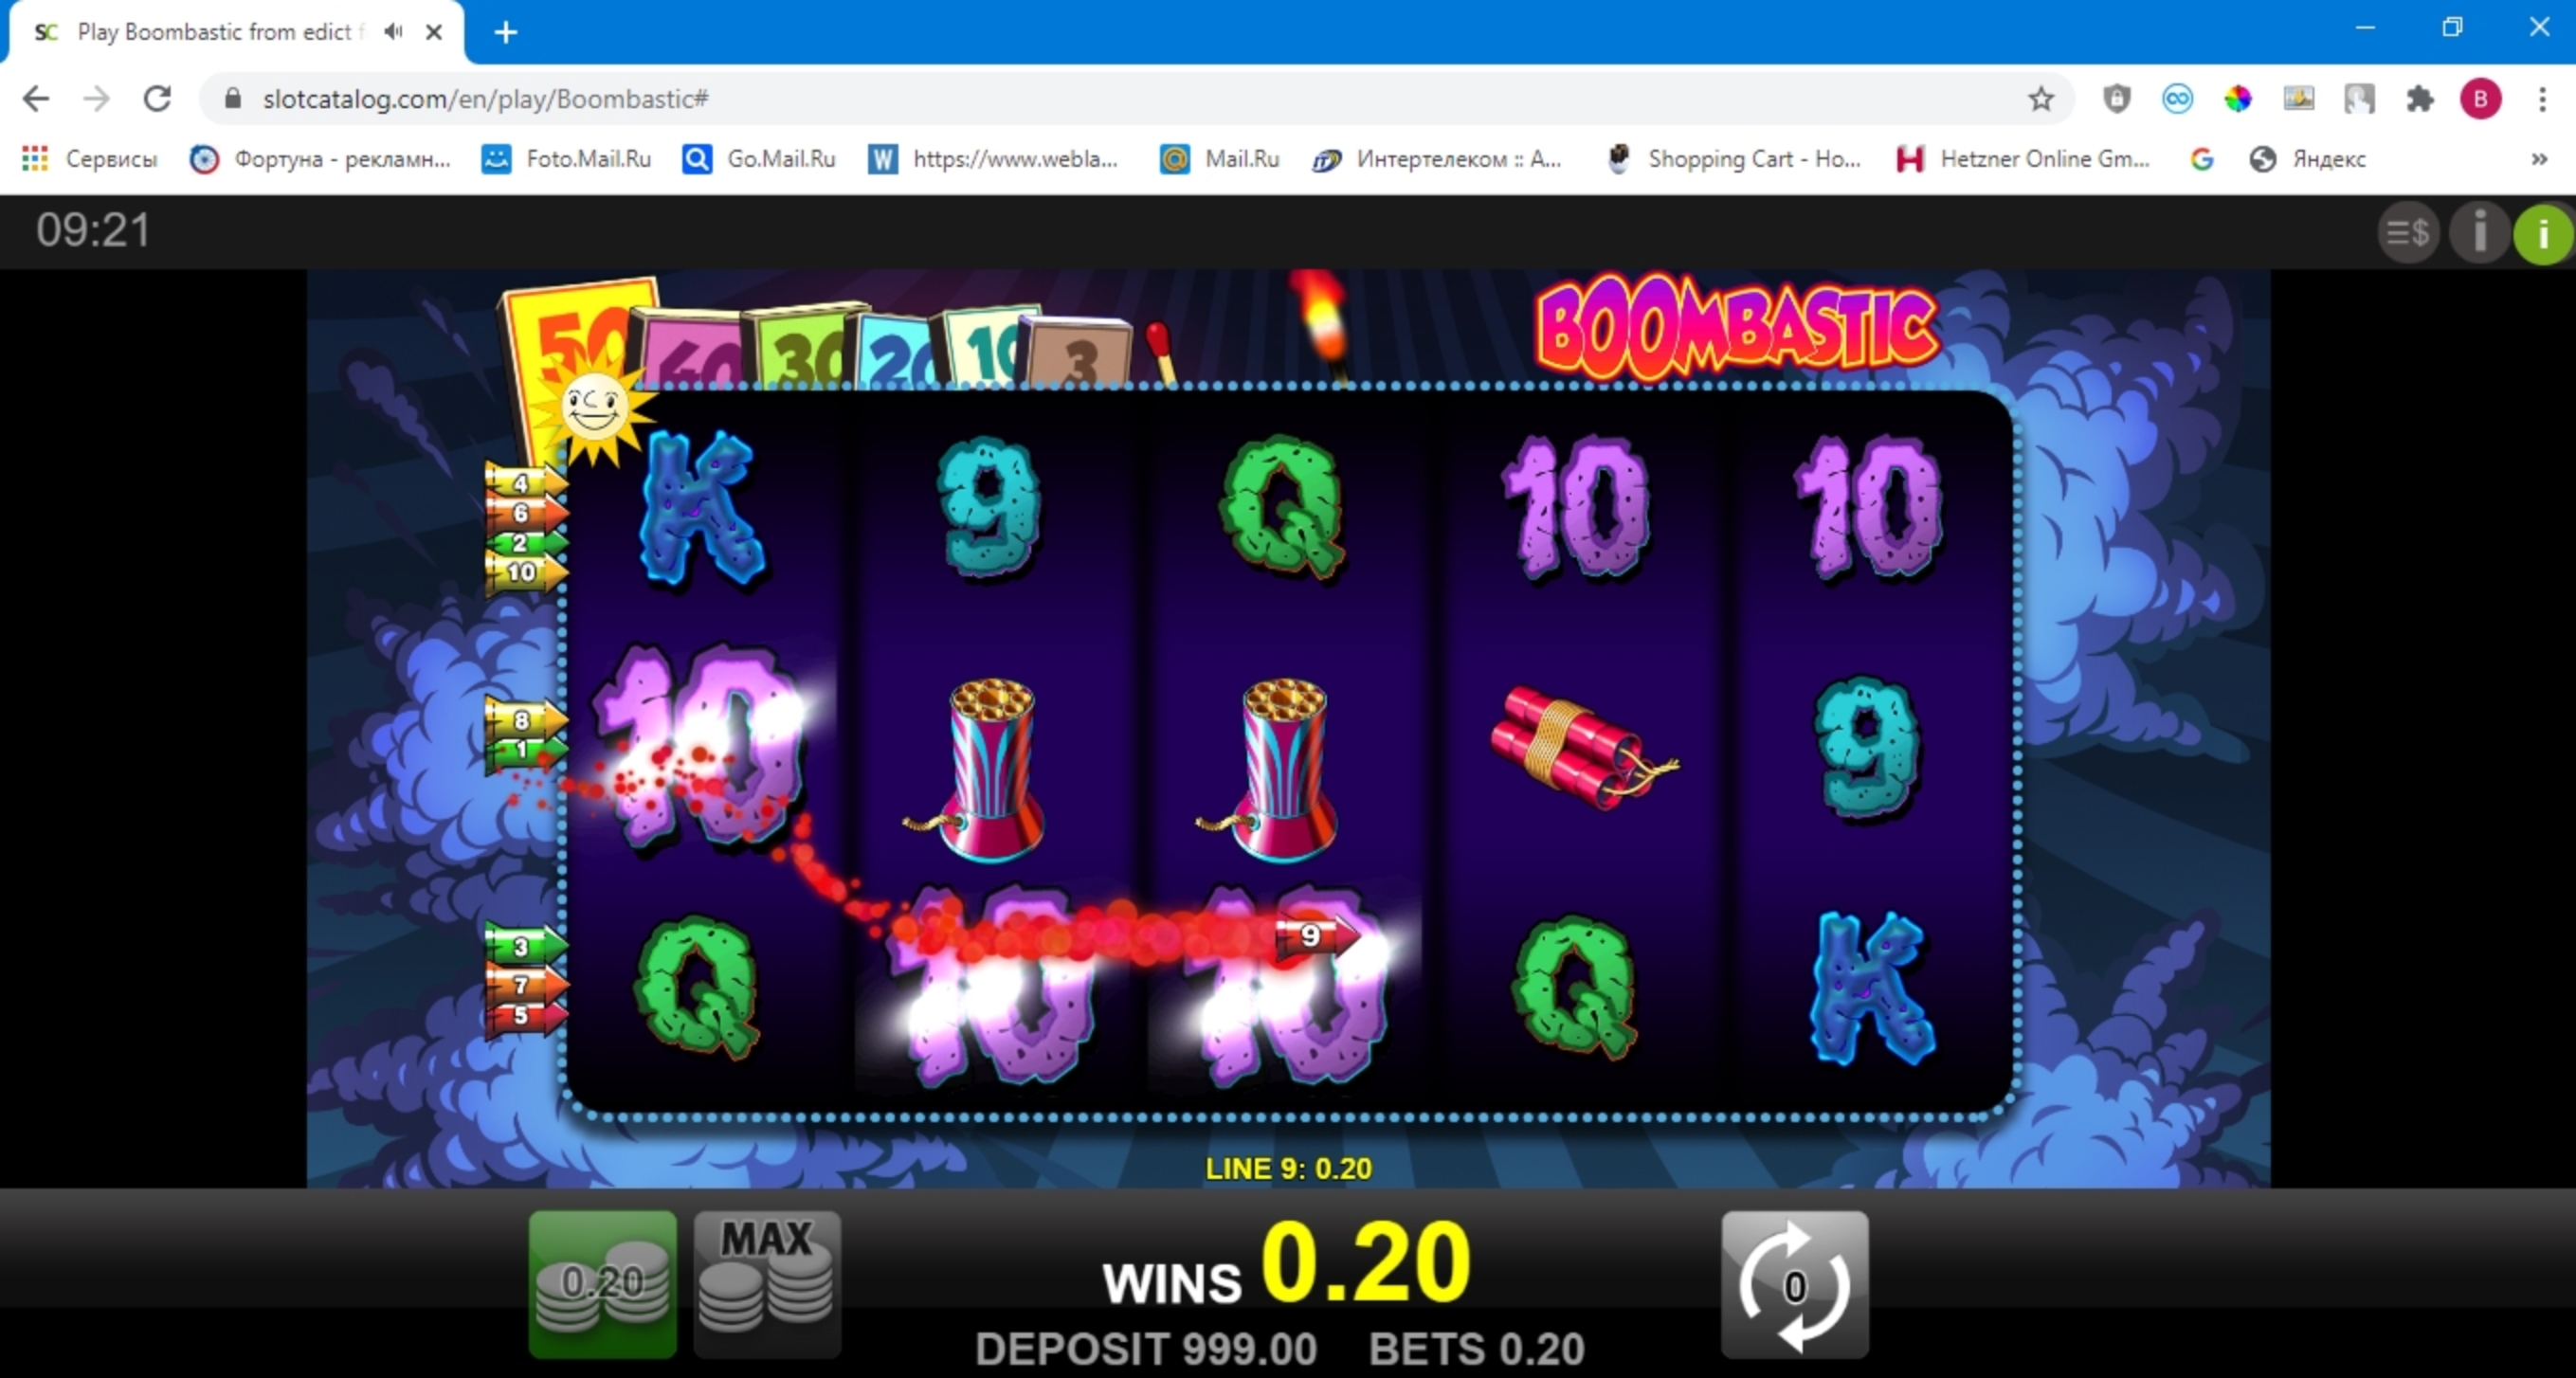 Win Money in Boombastic Free Slot Game by edict